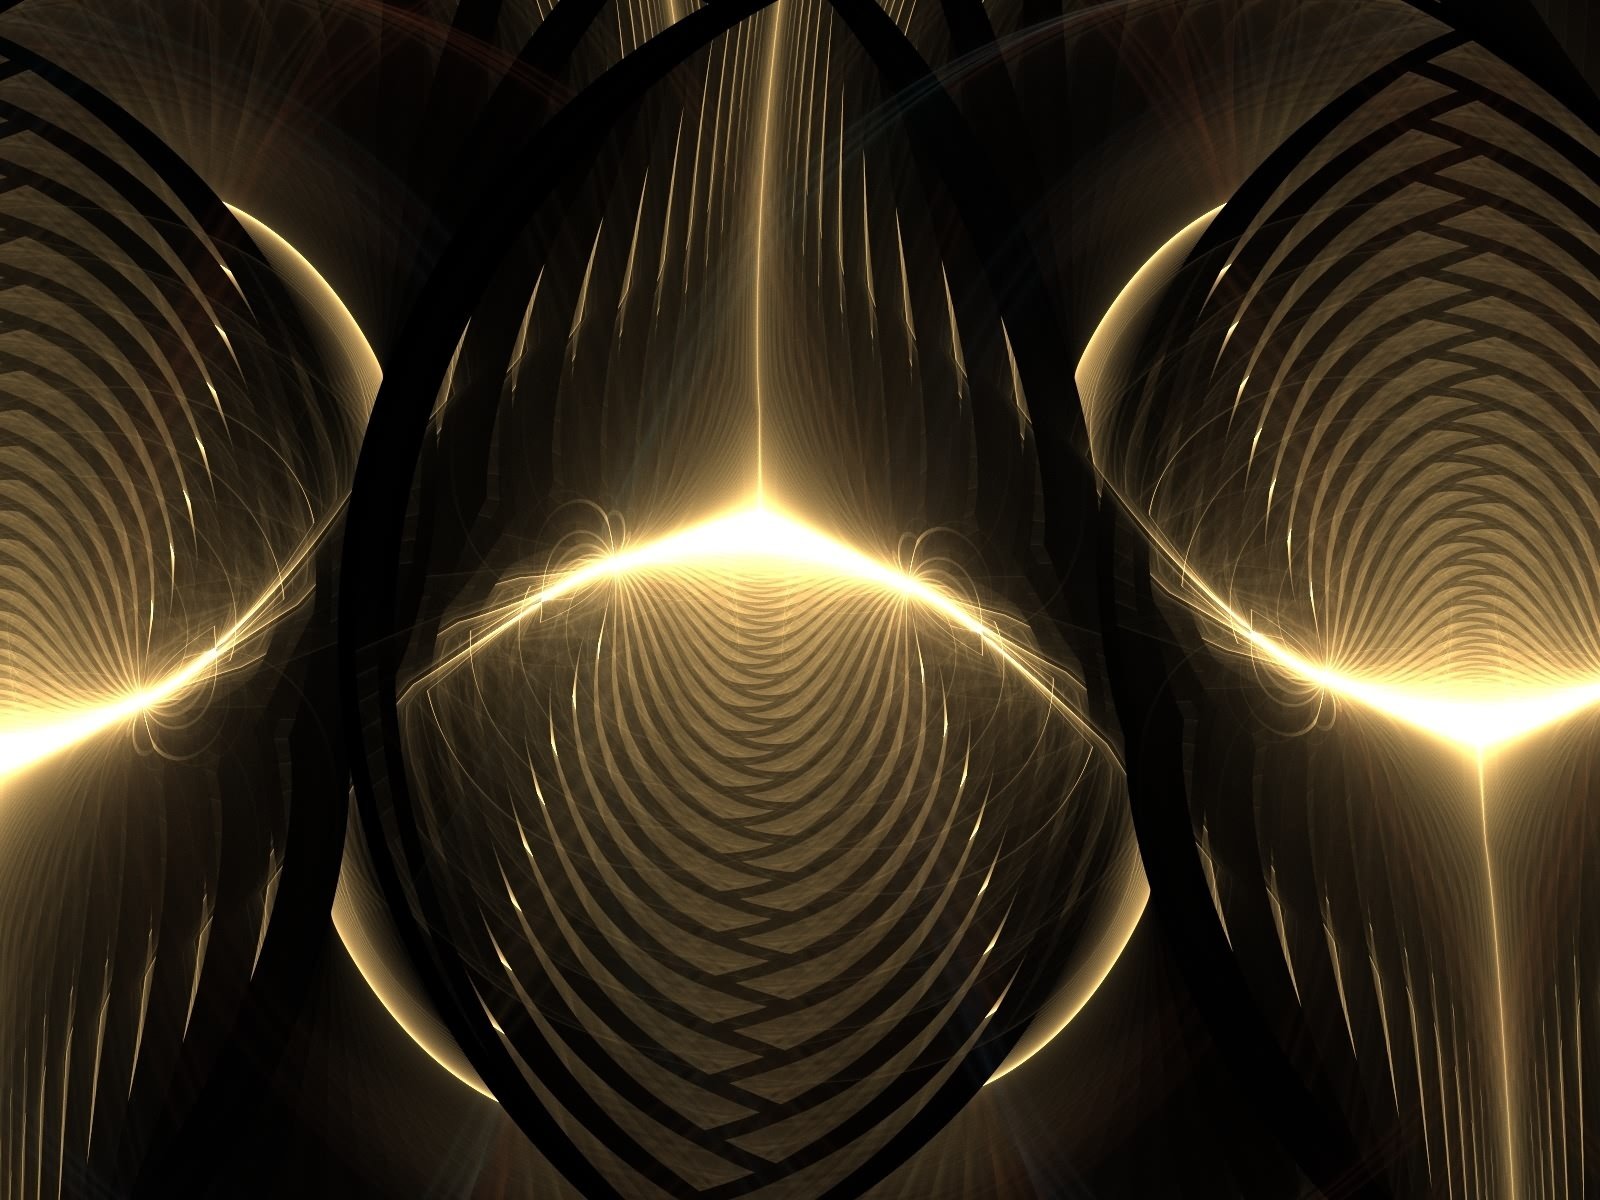 Gold Abstract wallpaper HD for desktop background